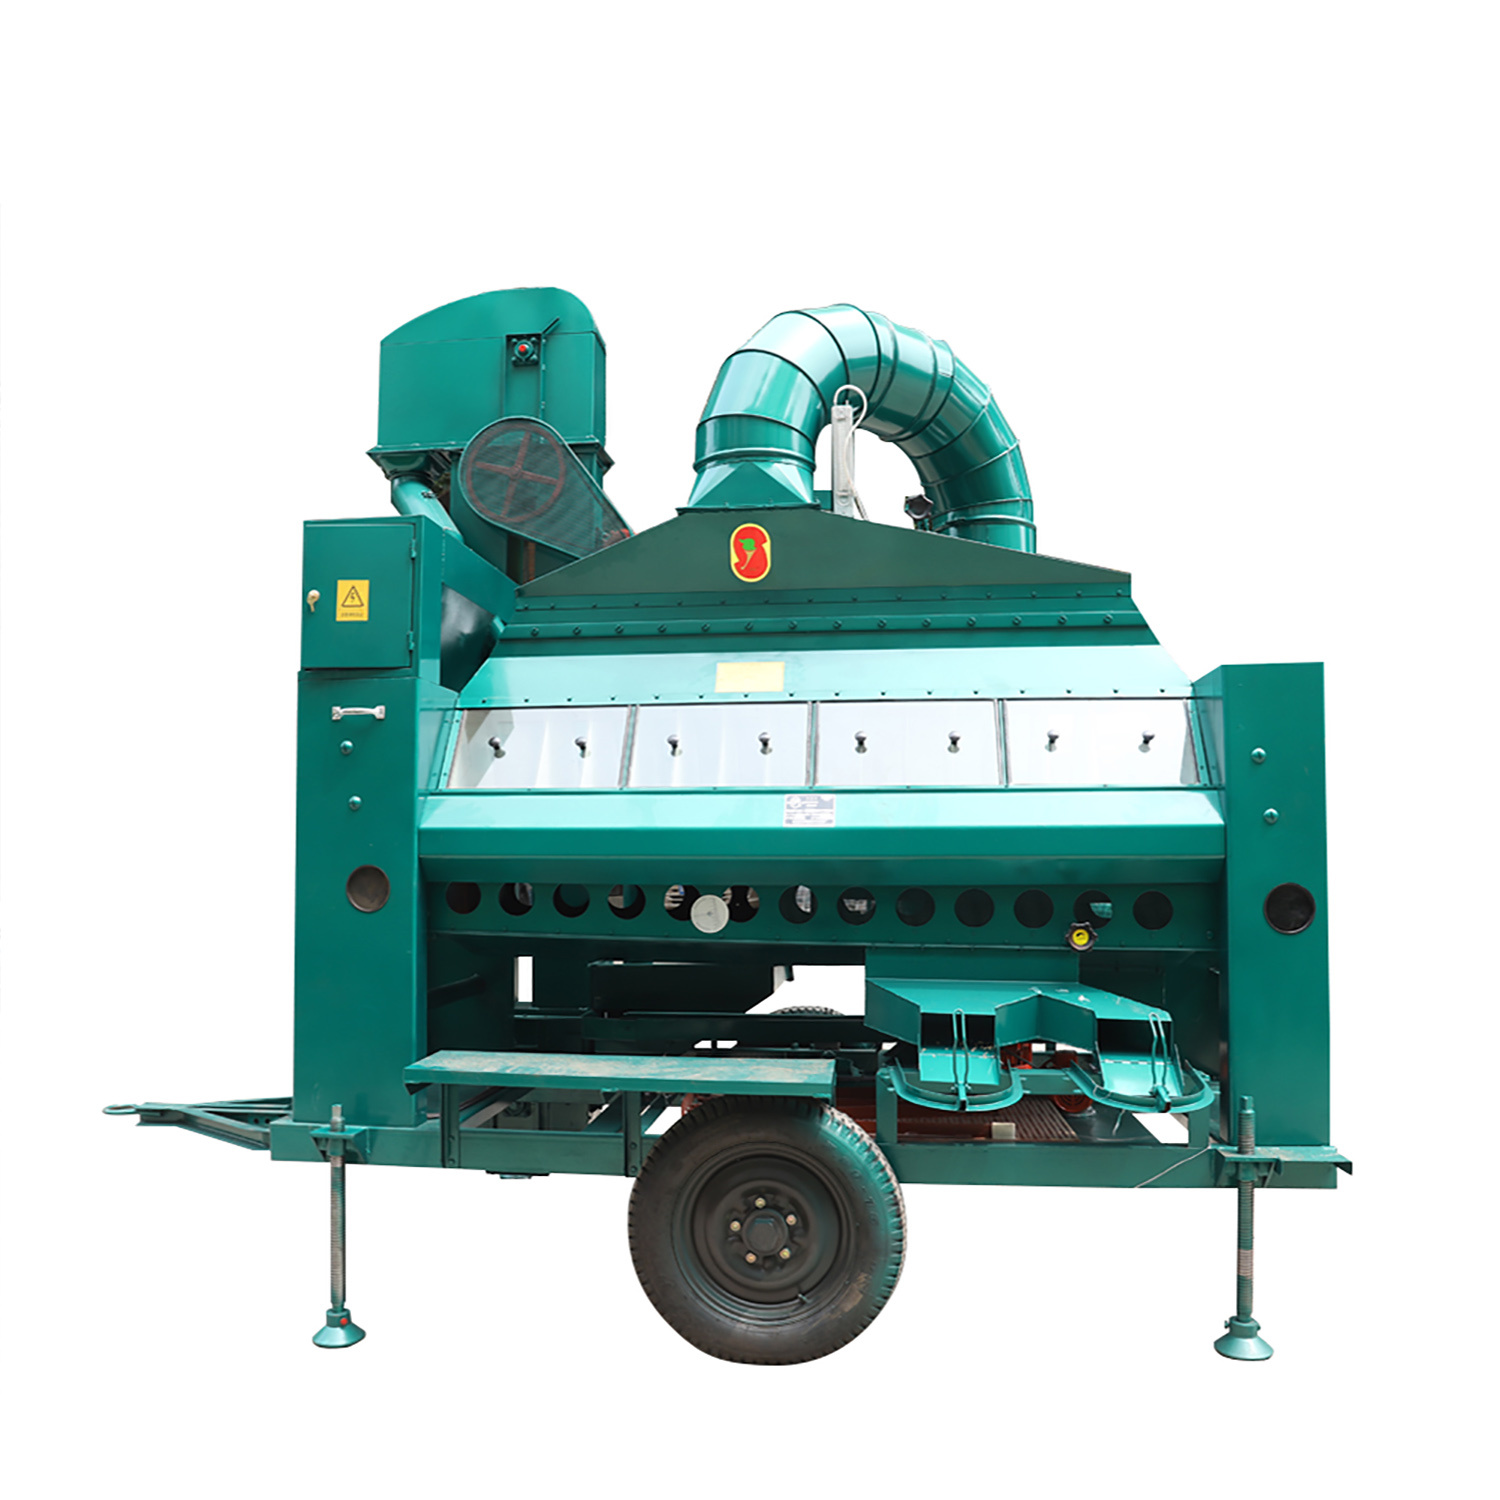 Millet Fonio Sorghum Seed Cleaning and Grading Machine